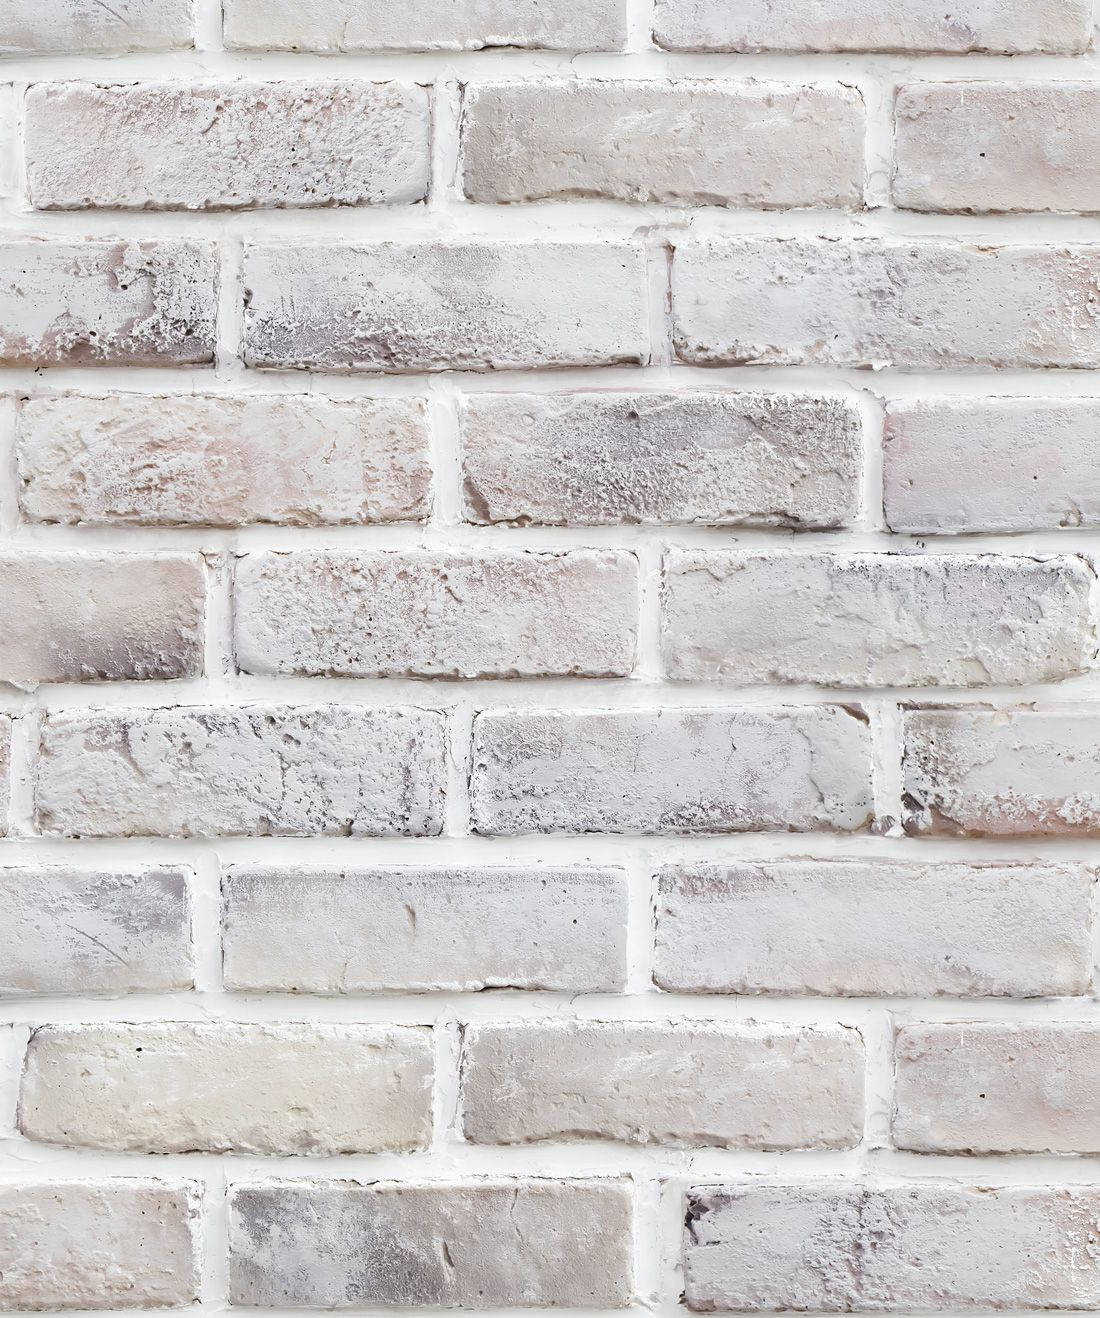 A Lime Washed White Brick Wall in Stretcher Bond Wallpaper